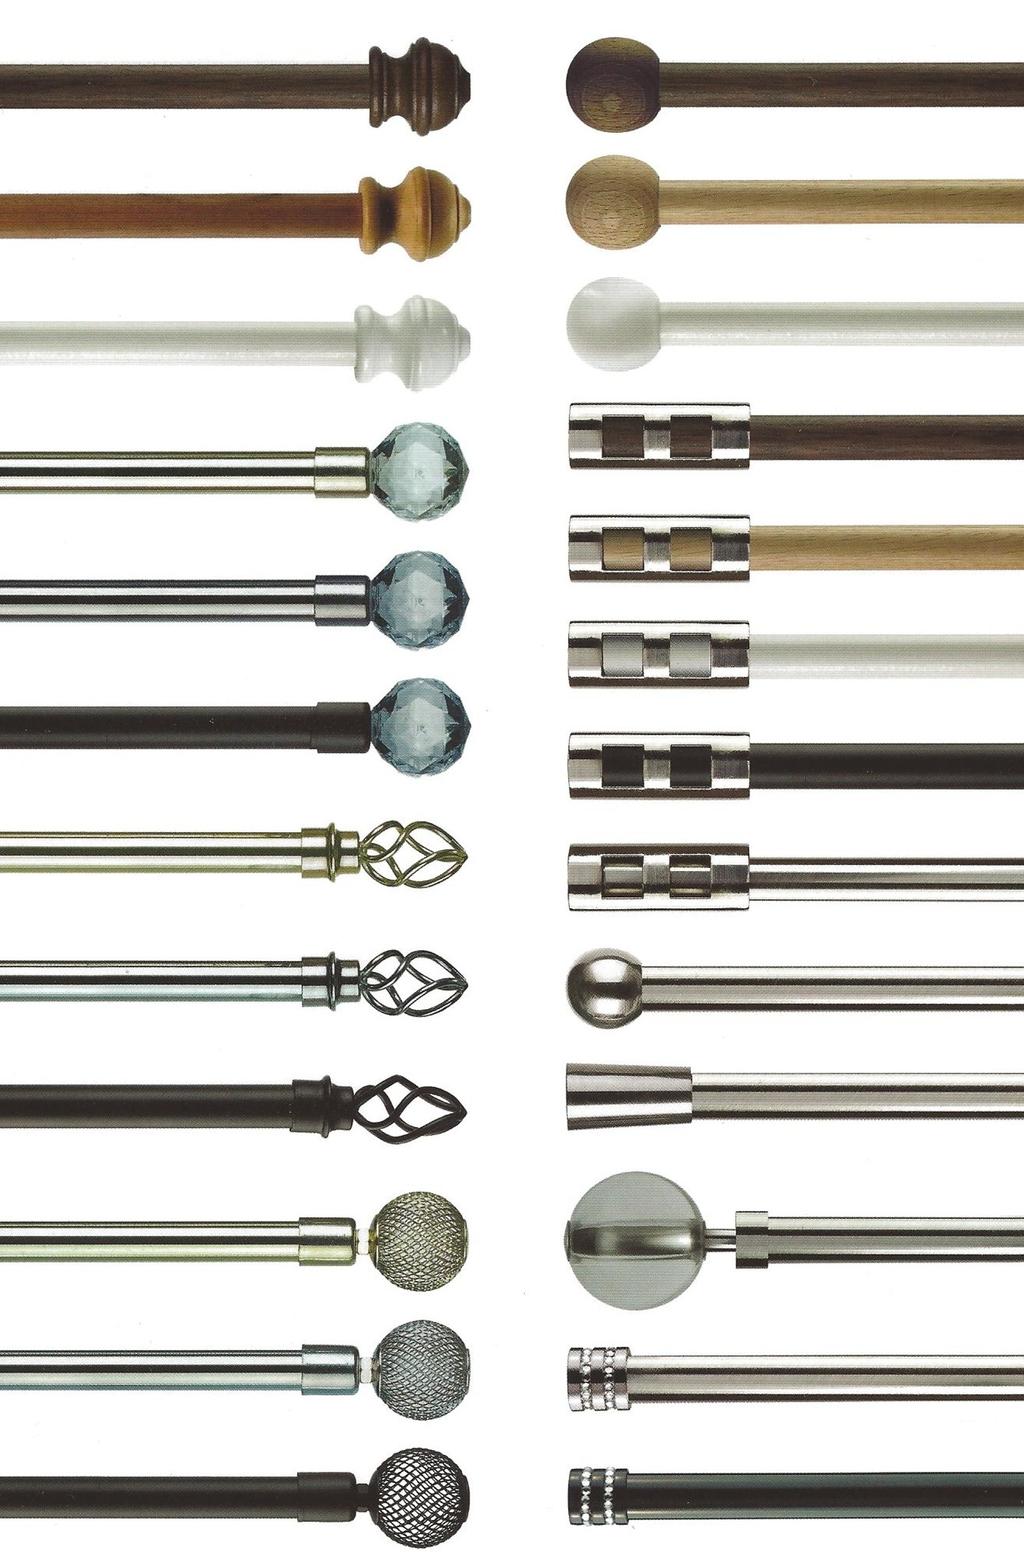 POLES & FINIALS THESE POLES & FINIALS ARE SAMPLED IN THE SOLARÉ SHADE COLLECTION. POLES, FINIALS, AND FURTHER ACCESSORIES ARE AVAILABLE IN ALL SOLARÉ SHADE COLLECTIONS.